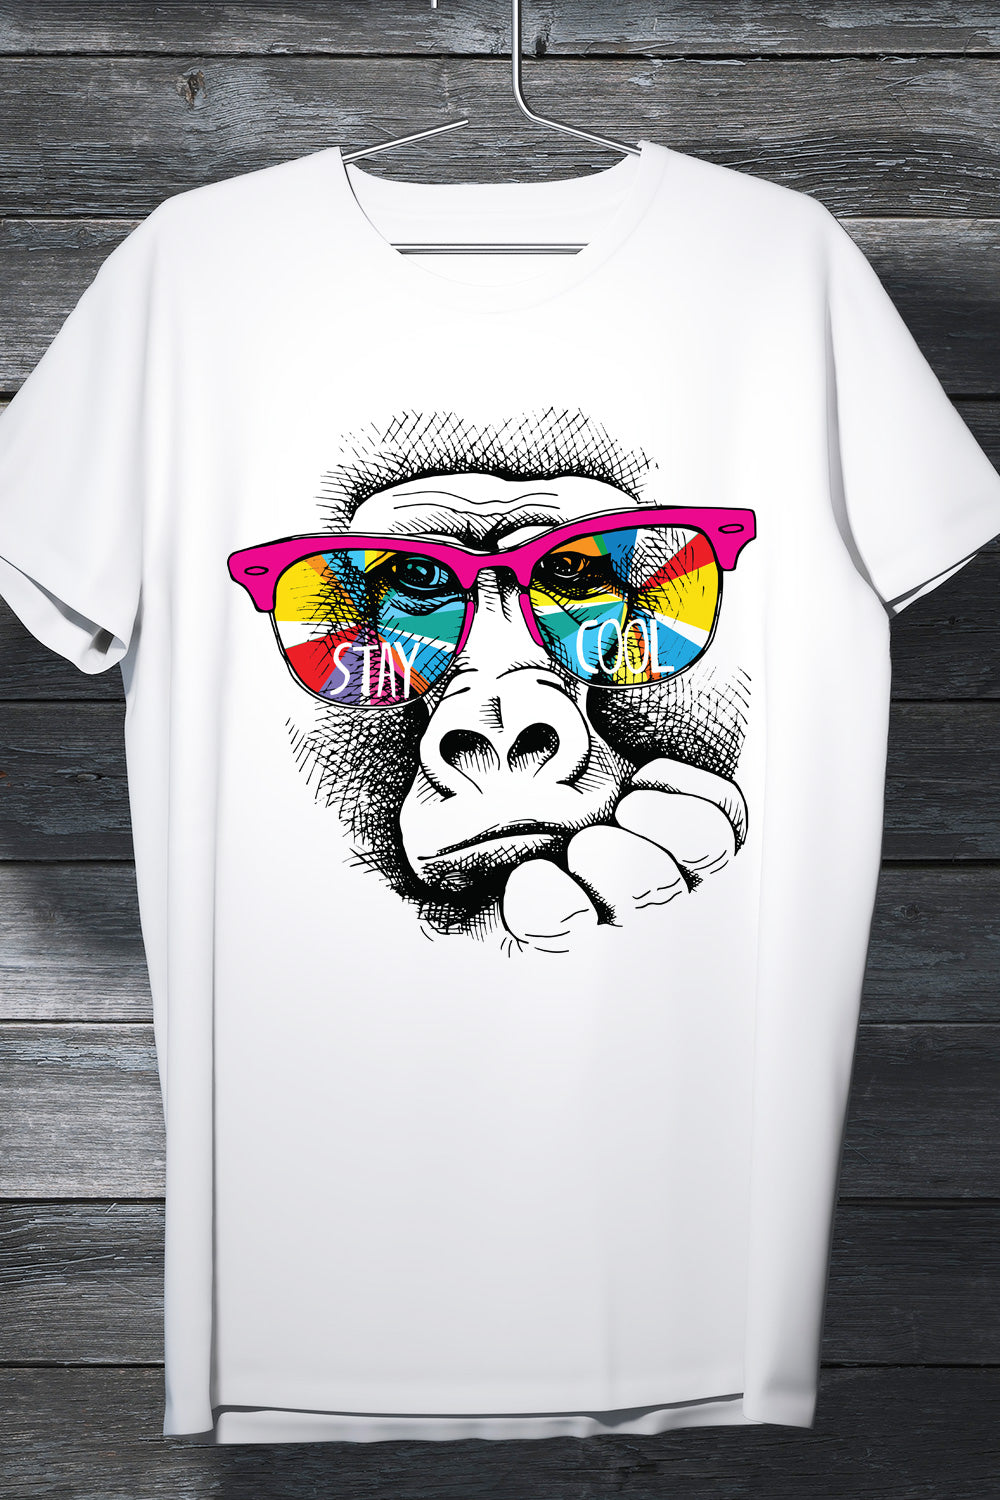 Stay Cool - Monkey with Goggles Cool printed TShirt